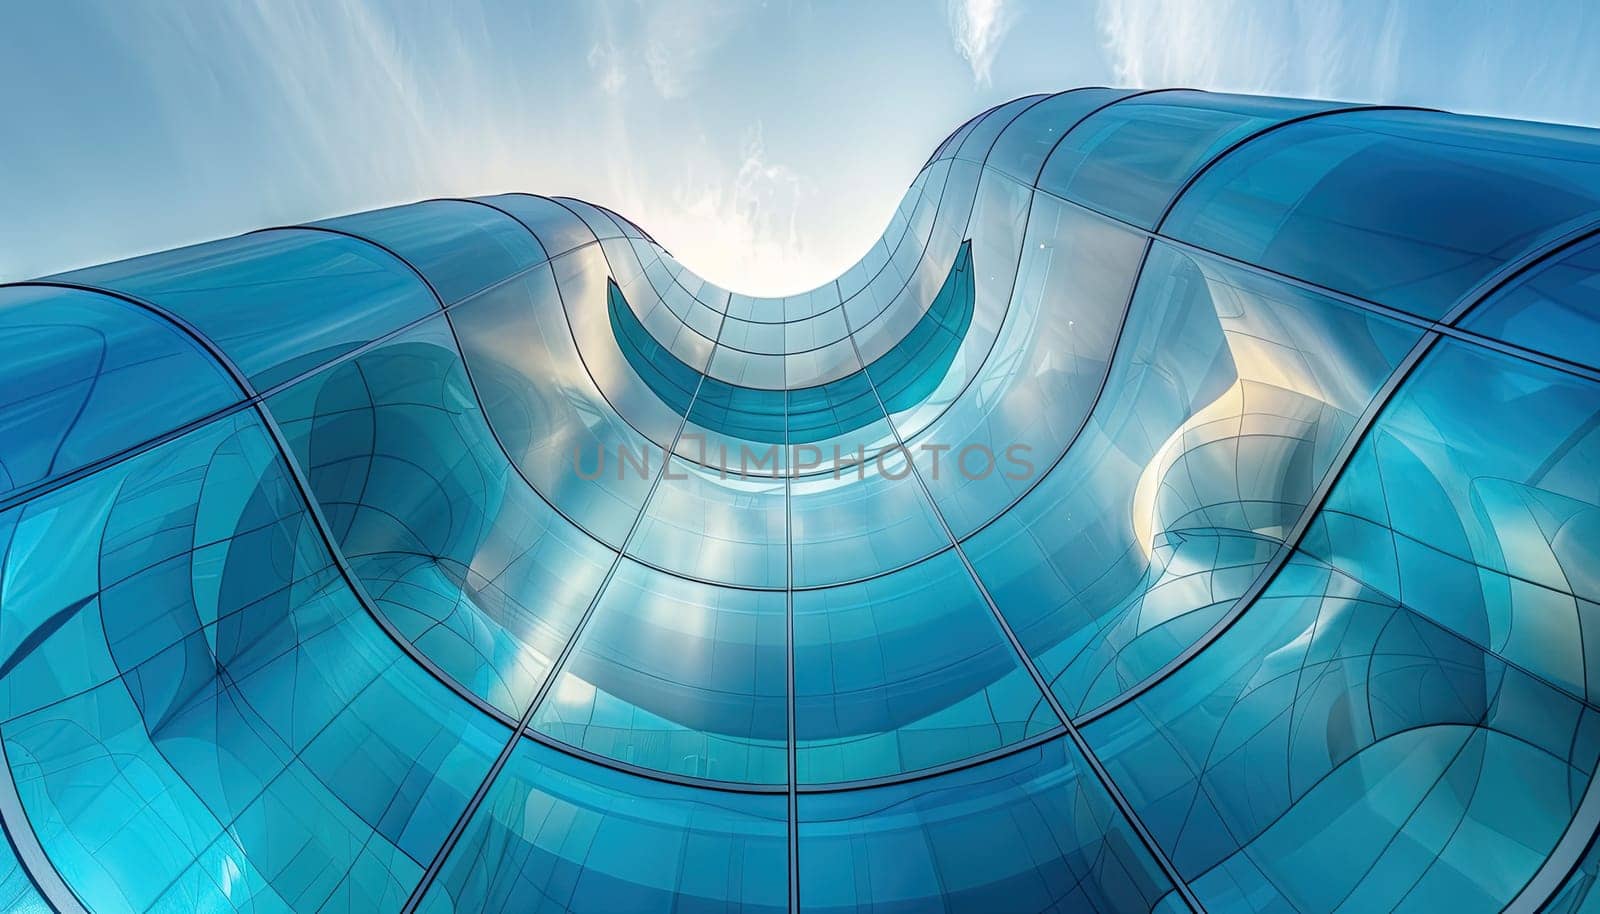 A blue building with a curved glass facade by AI generated image.